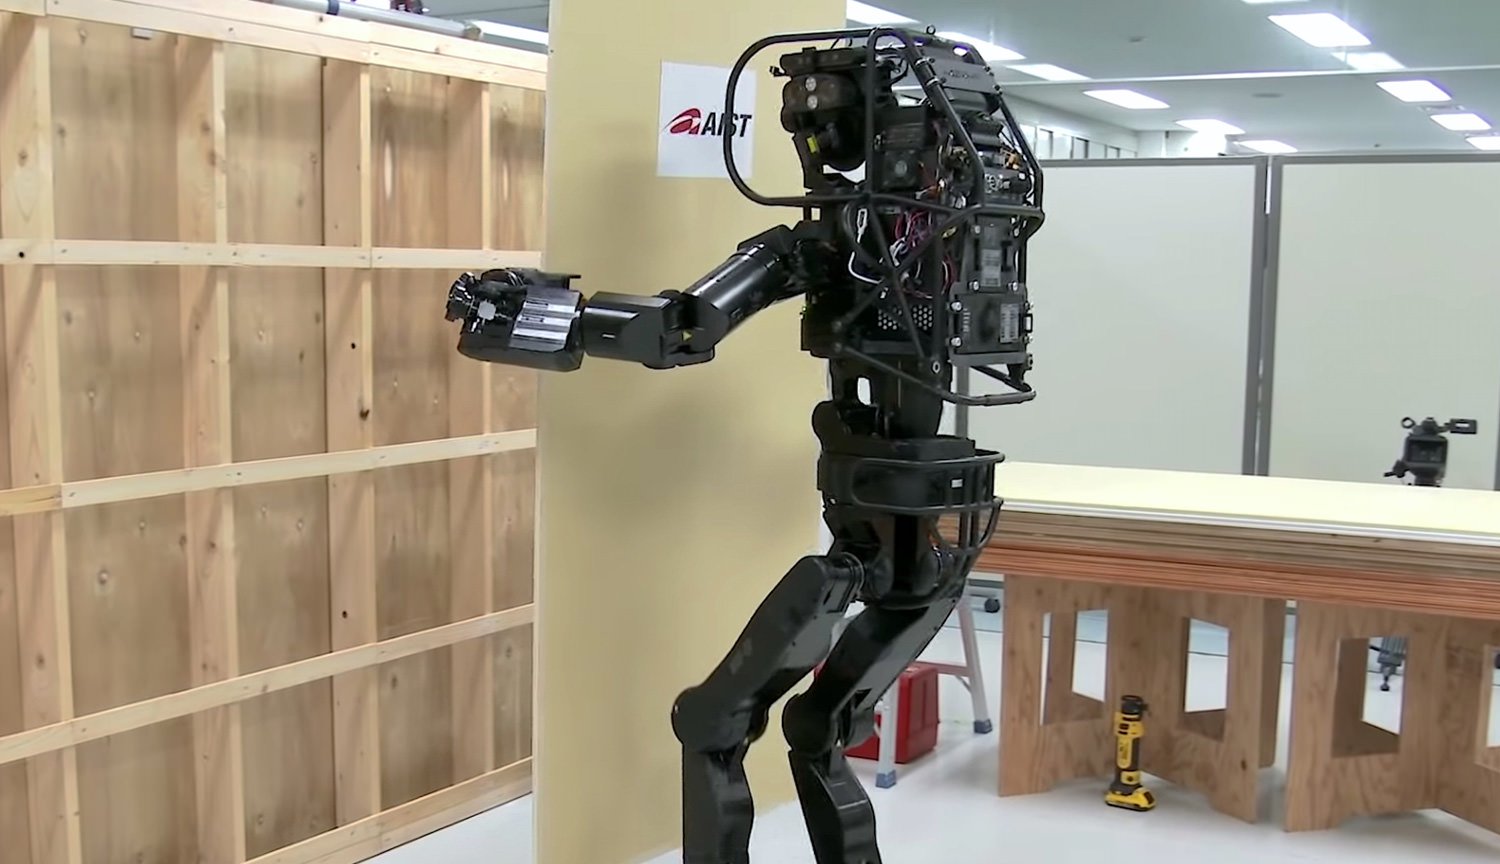 Video: two-legged robot Builder HRP-5P self-secures Board to the wall